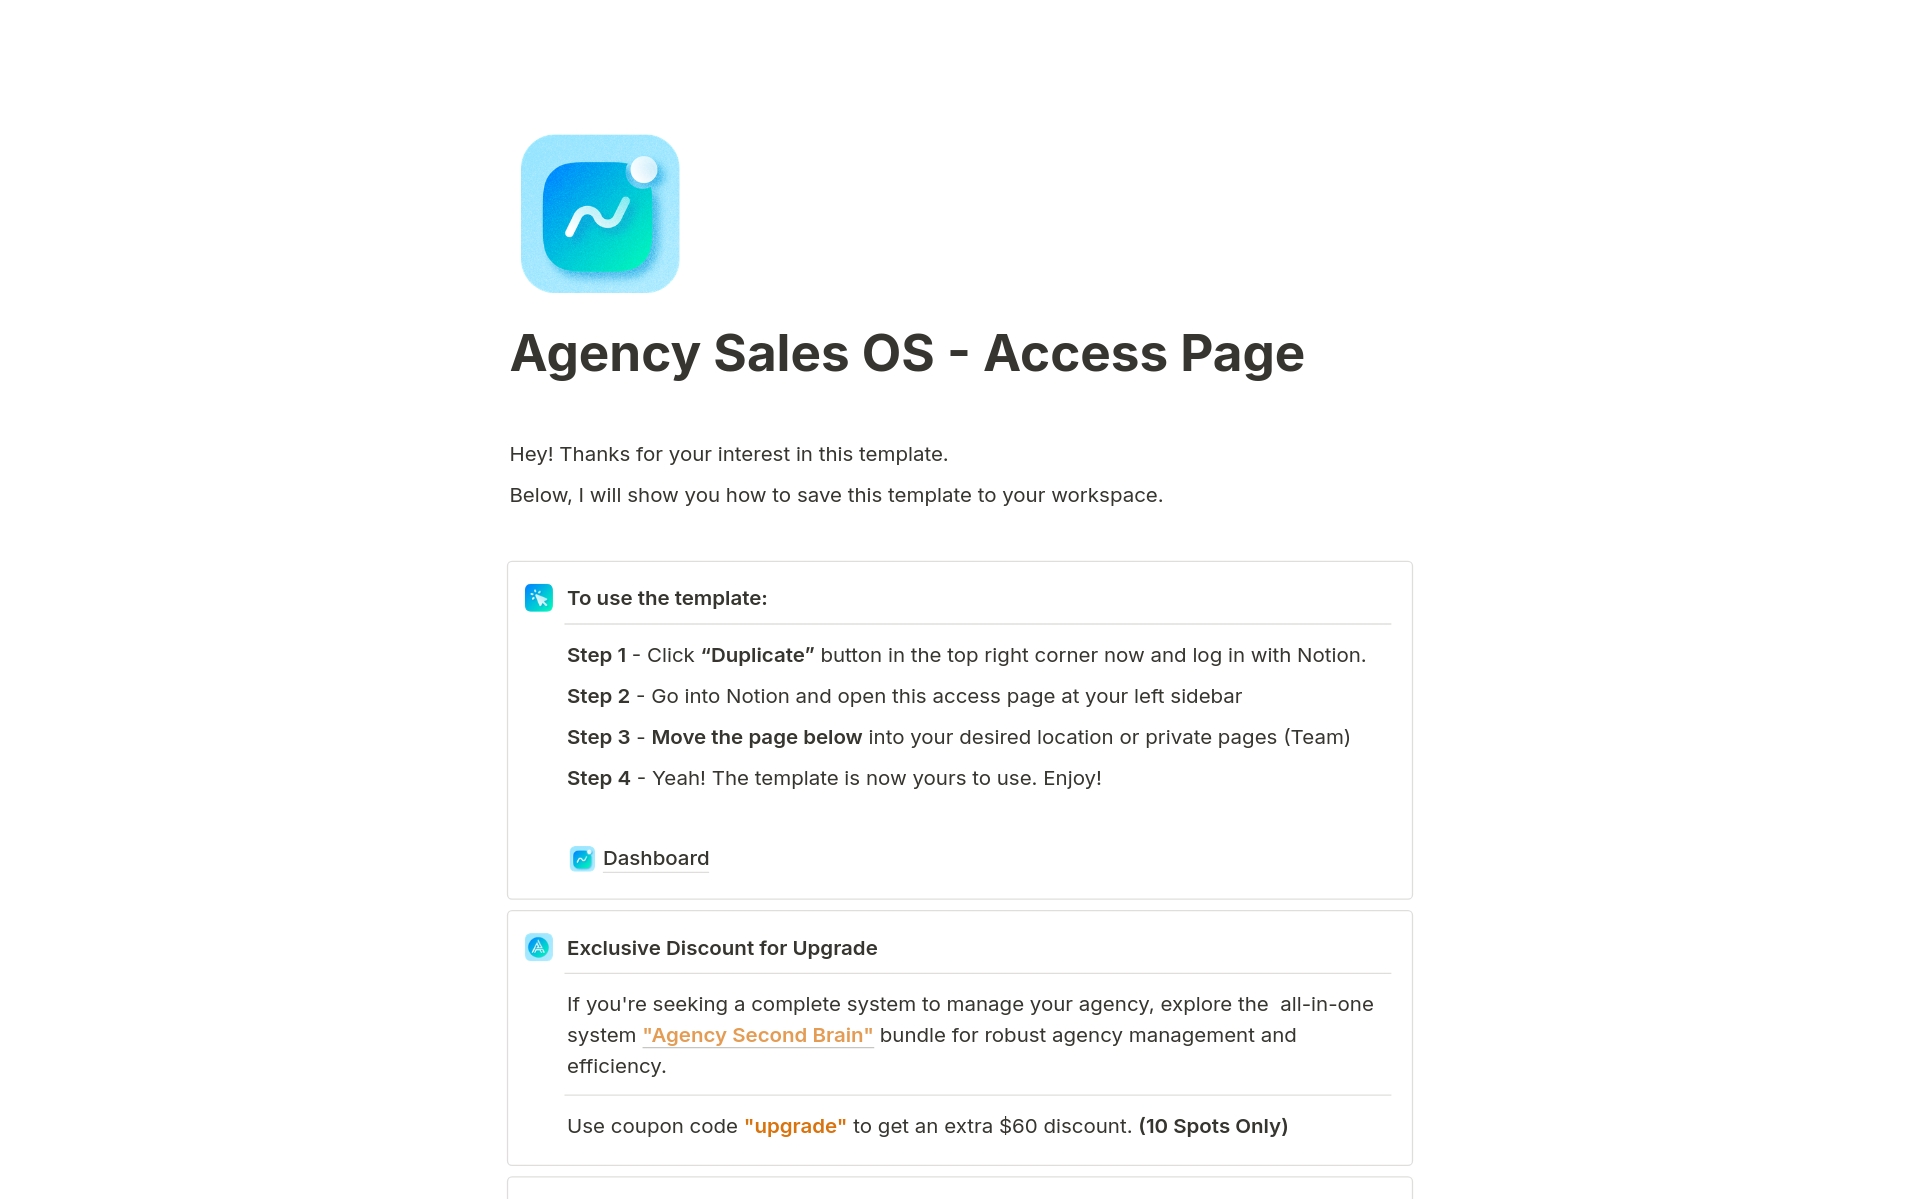 Embrace the power of Agency Sales OS to streamline your sales processes, enhance lead engagement, and turbocharge revenue growth consistently.